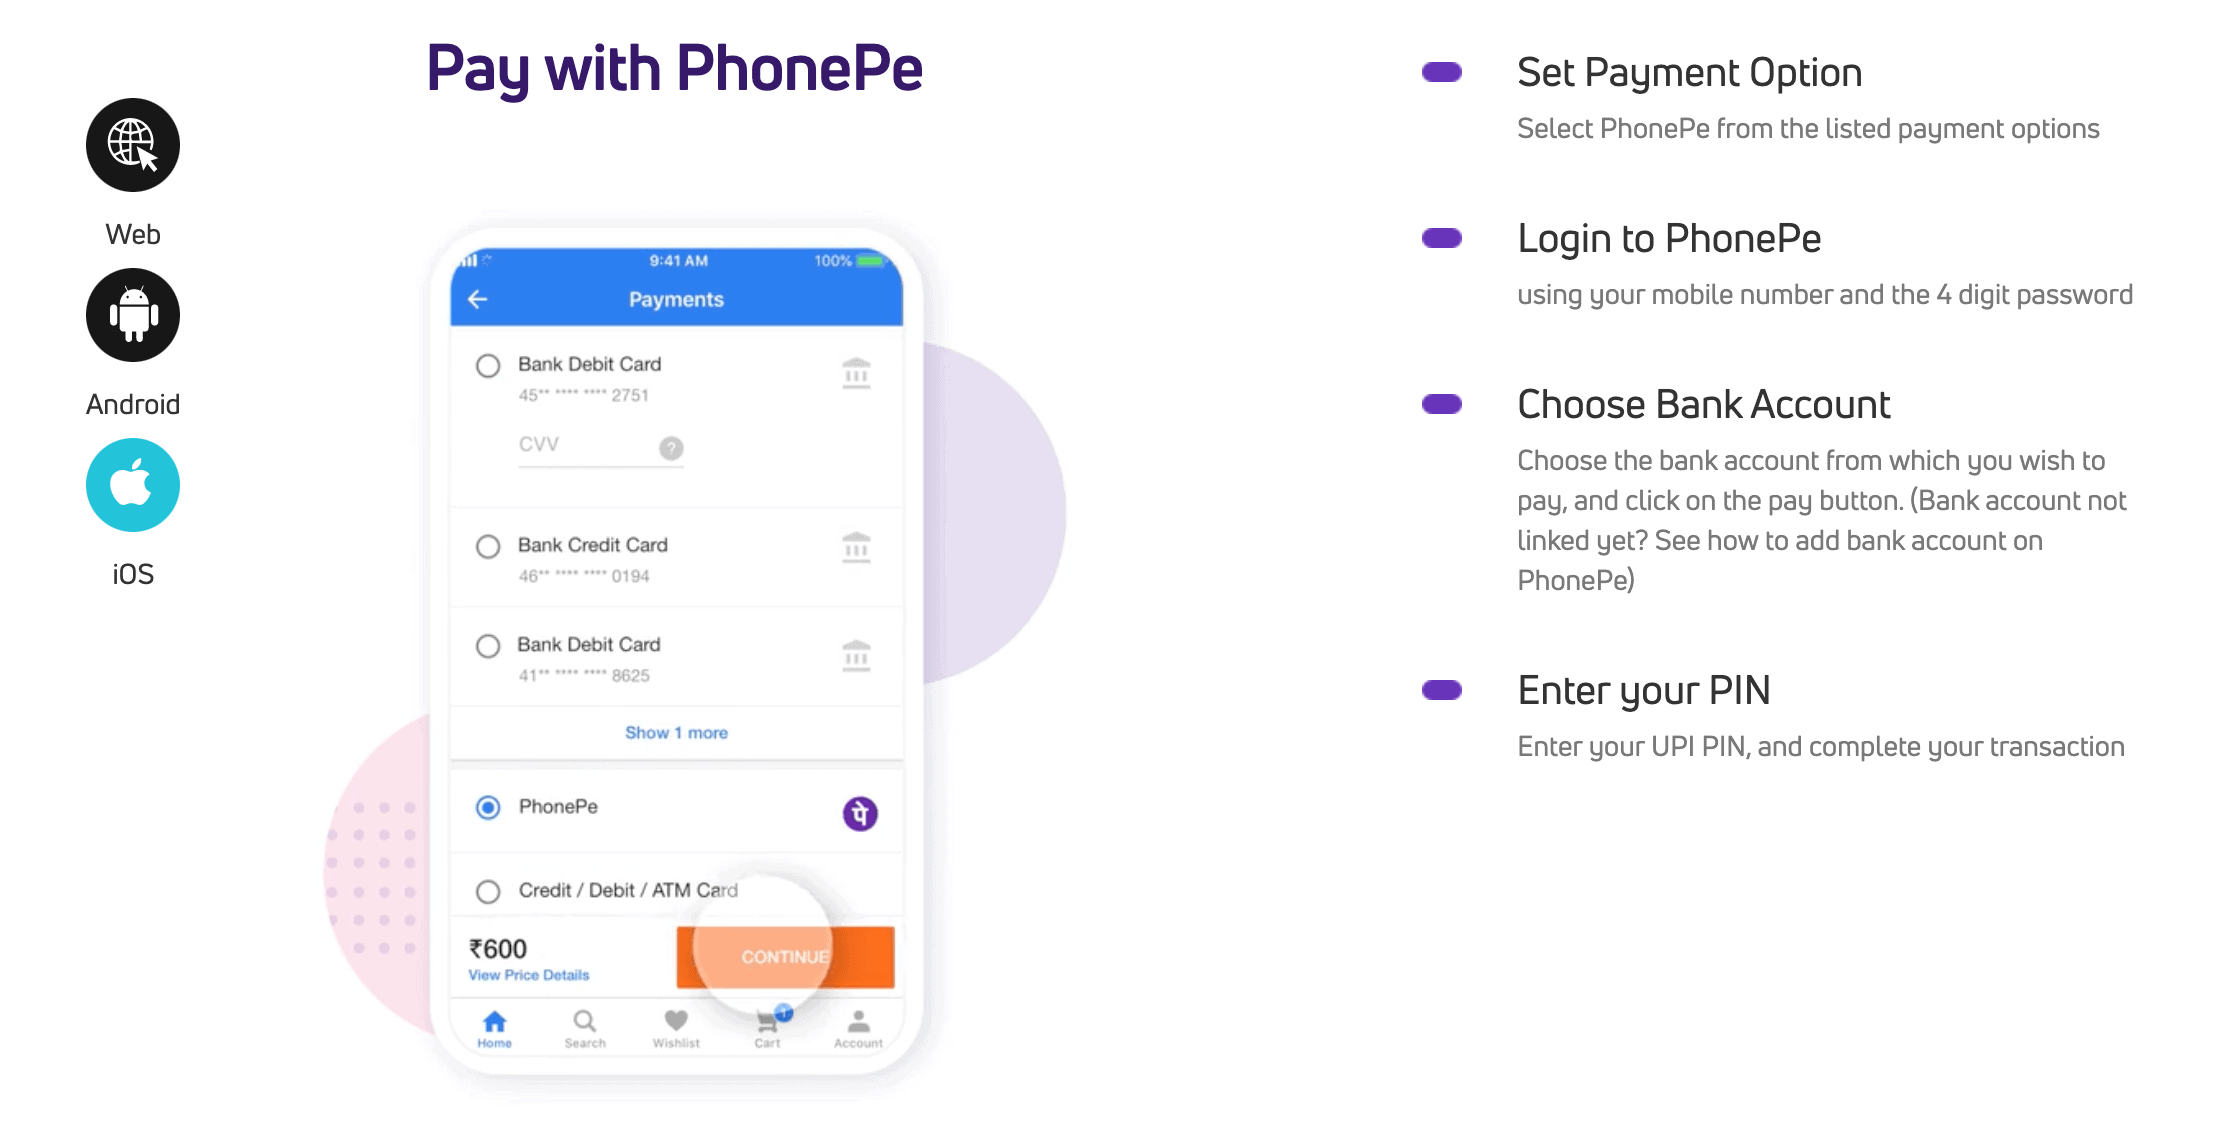 Screenshot on how to use PhonePe on iOS devices